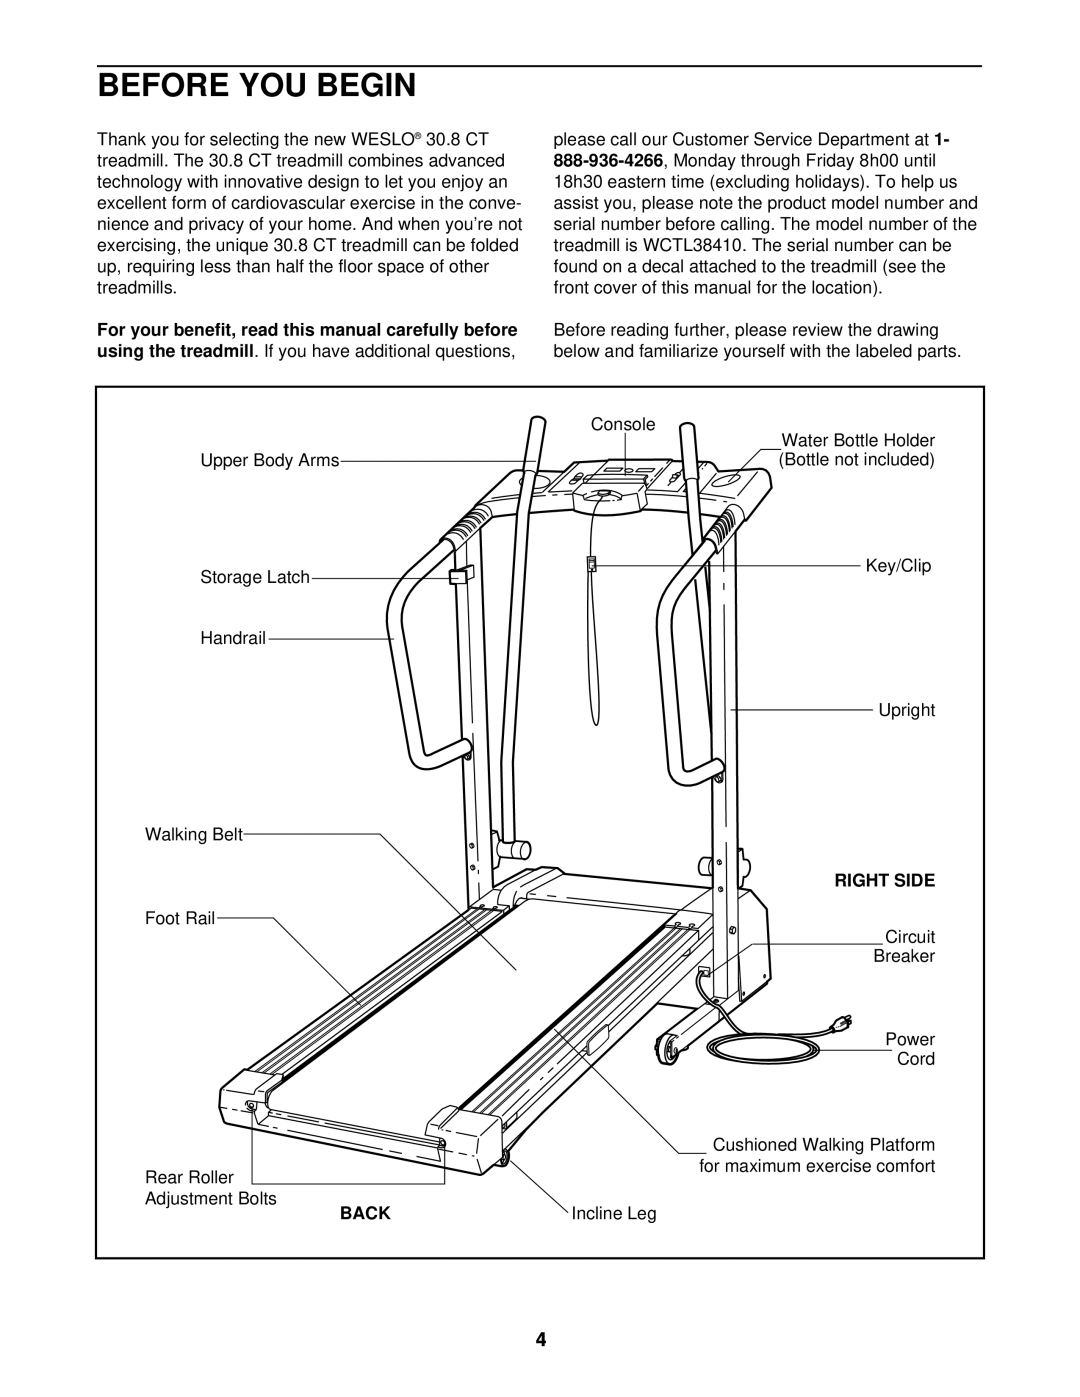 Weslo WCTL38410 user manual Before You Begin, Right Side, Back 